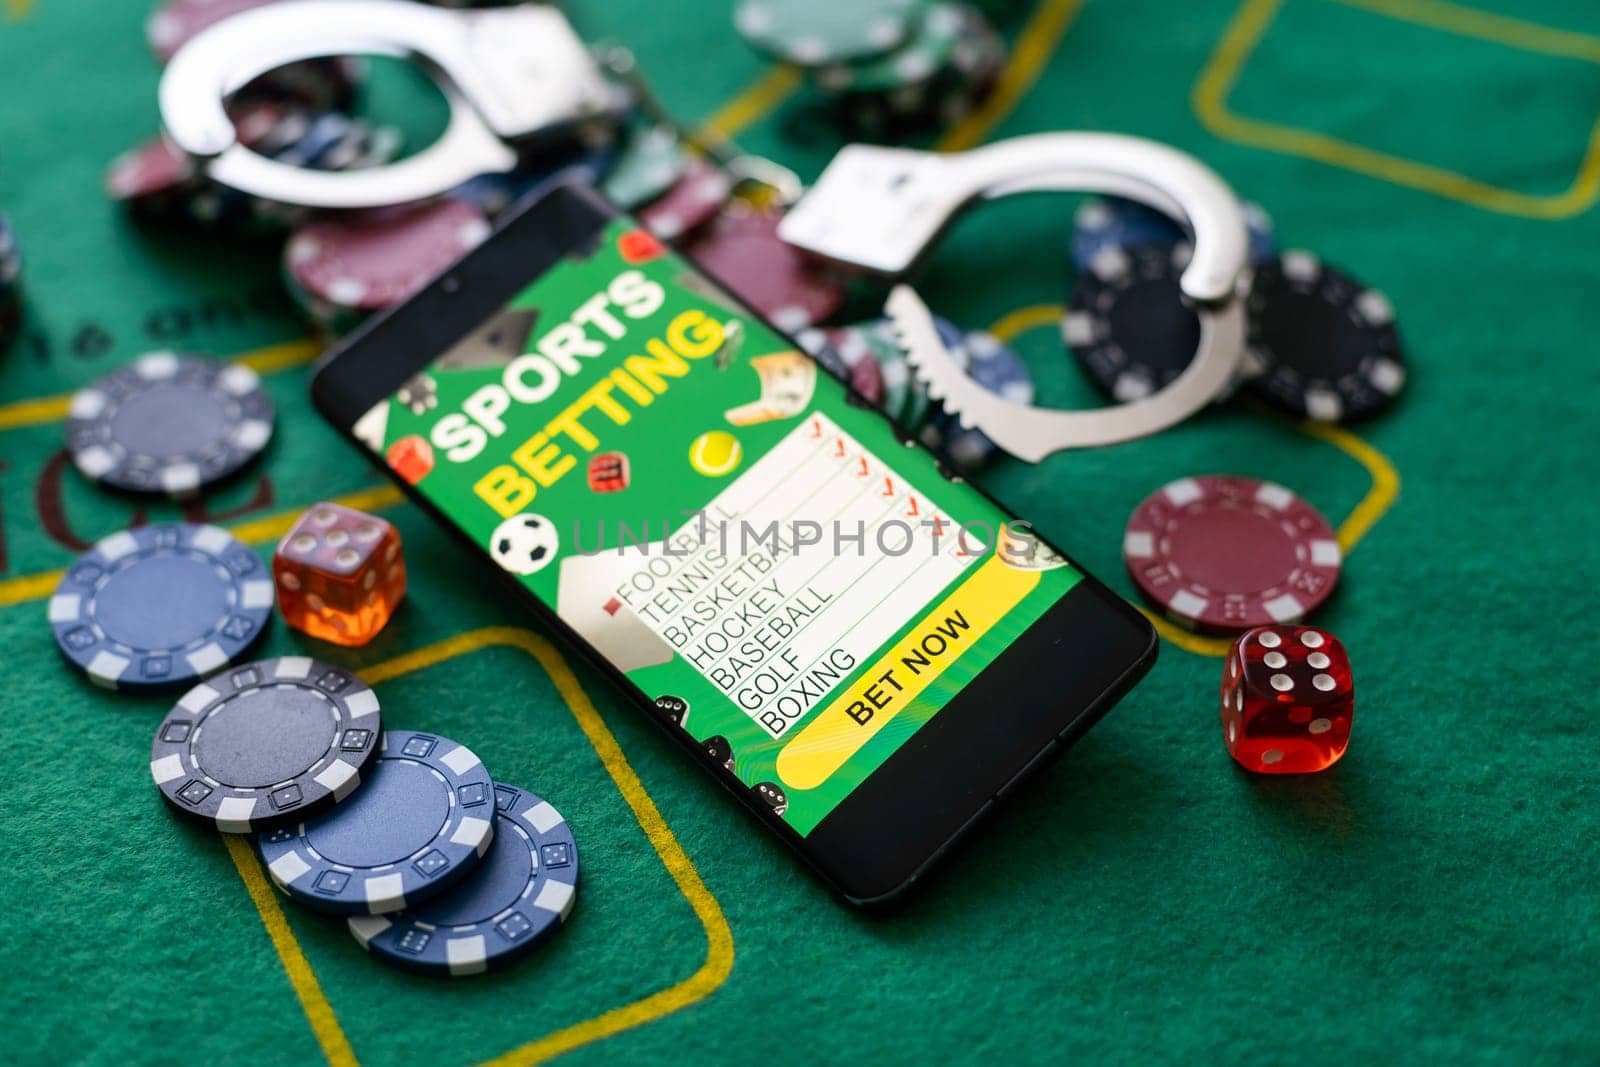 Casino chips a winning combination of cards flush royal next to the police handcuffs.